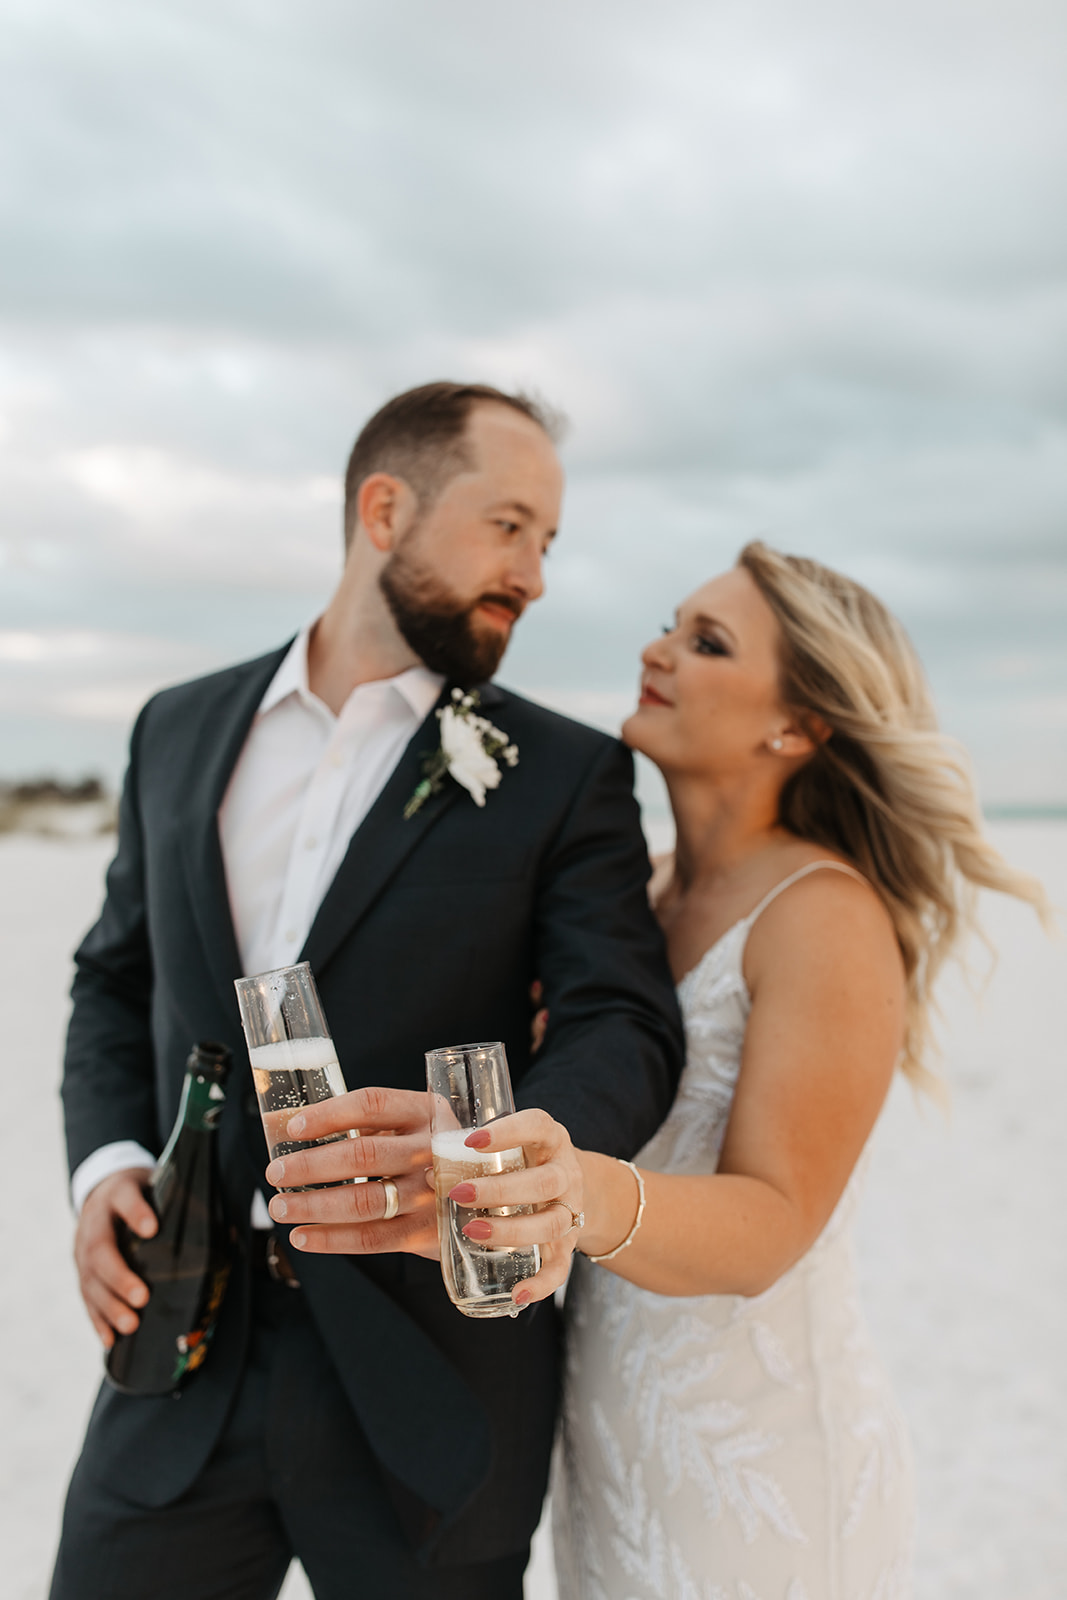 the couple celebrates their elopement with champagne